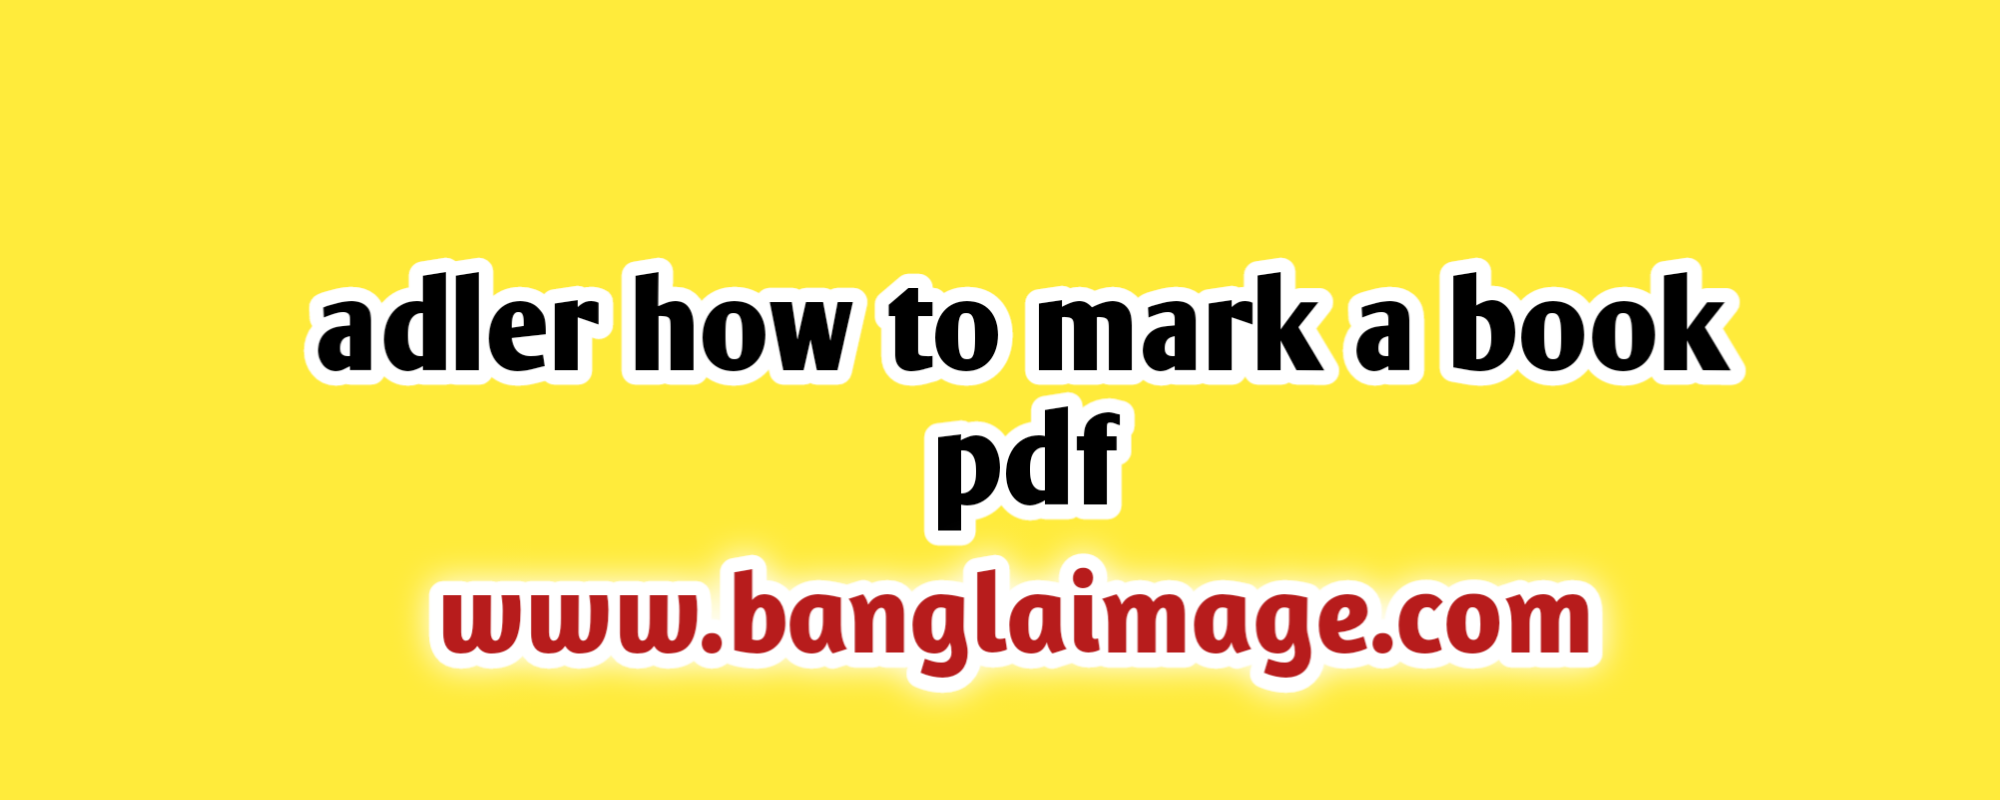 adler how to mark a book pdf, summary of how to mark a book, how to mark a book main idea, where was how to mark a book published